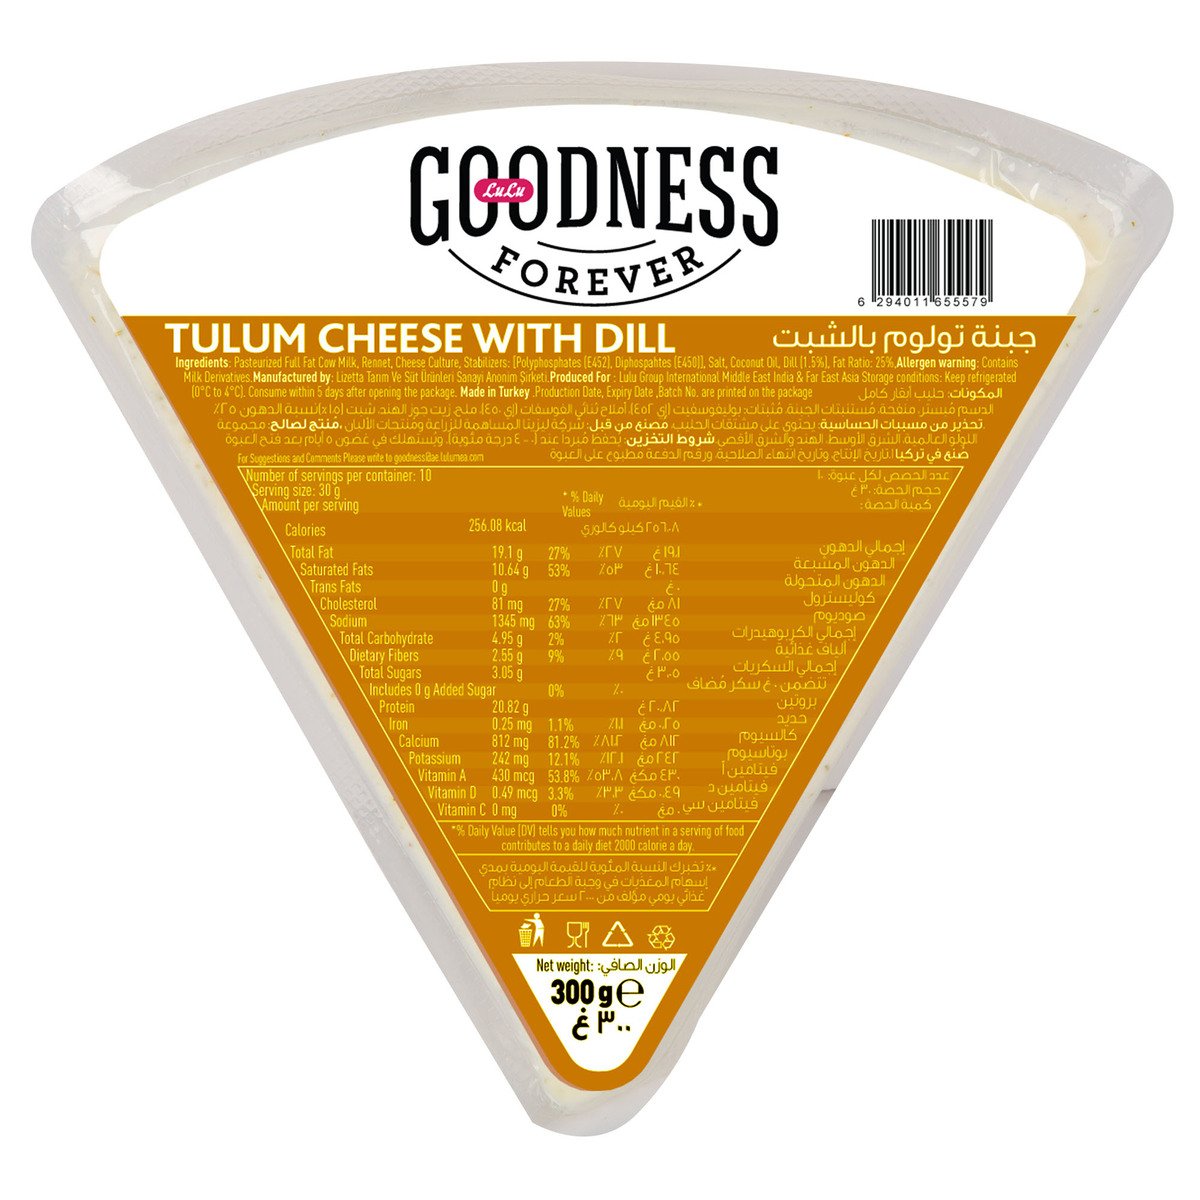 Goodness Forever Tulum Cheese With Dill 300 g